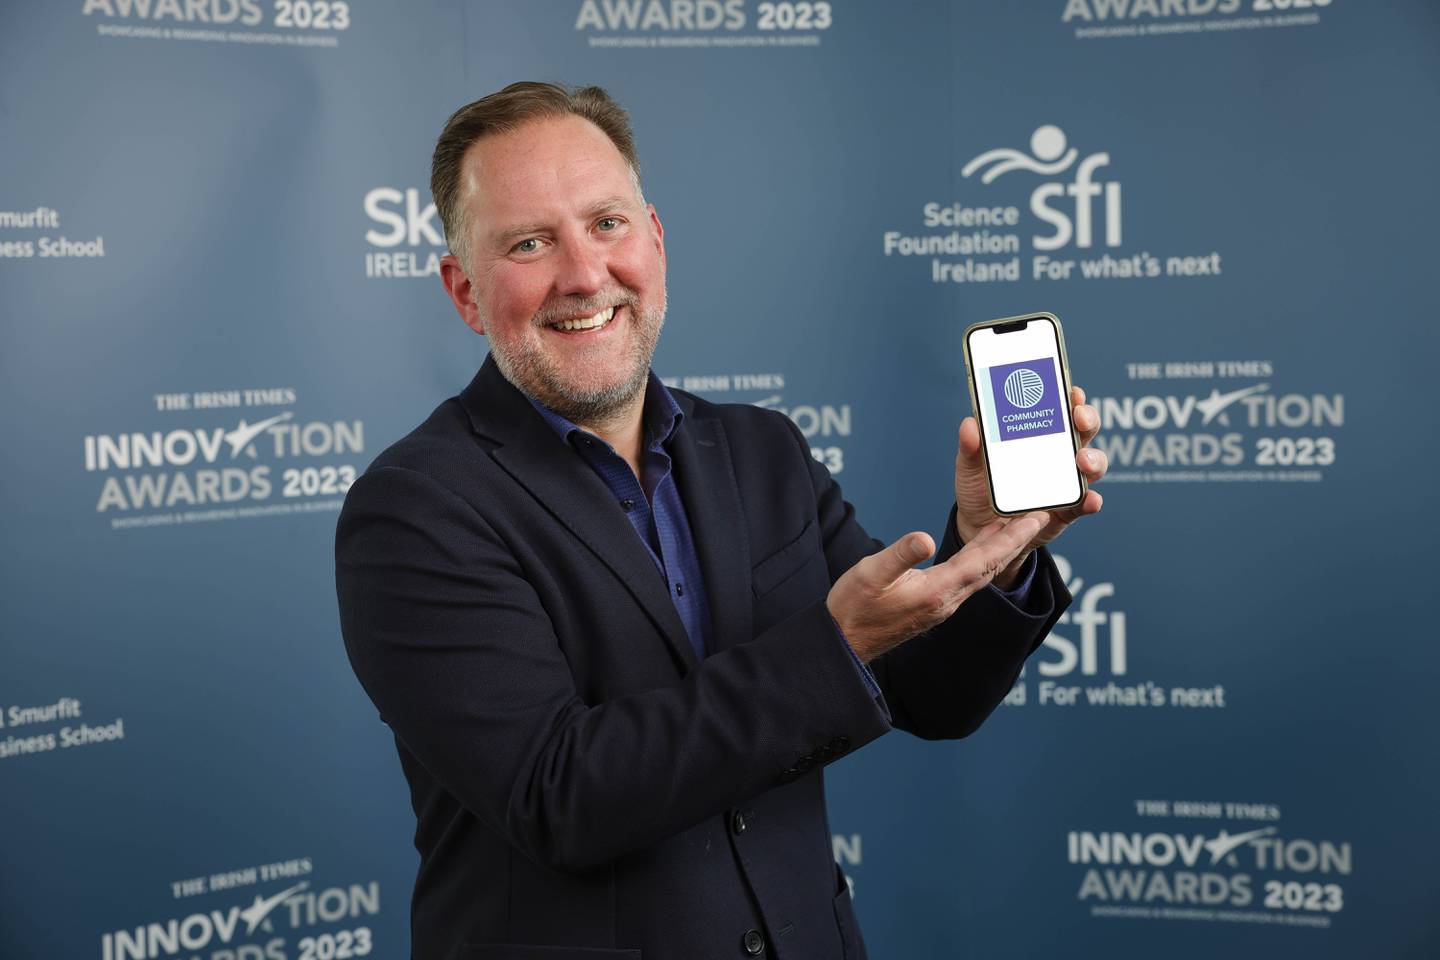 Cormac McKenna of Pharmacy Connect at The Irish Times Innovation Awards 2023 final judging day. Photograph: Conor McCabe Photography.